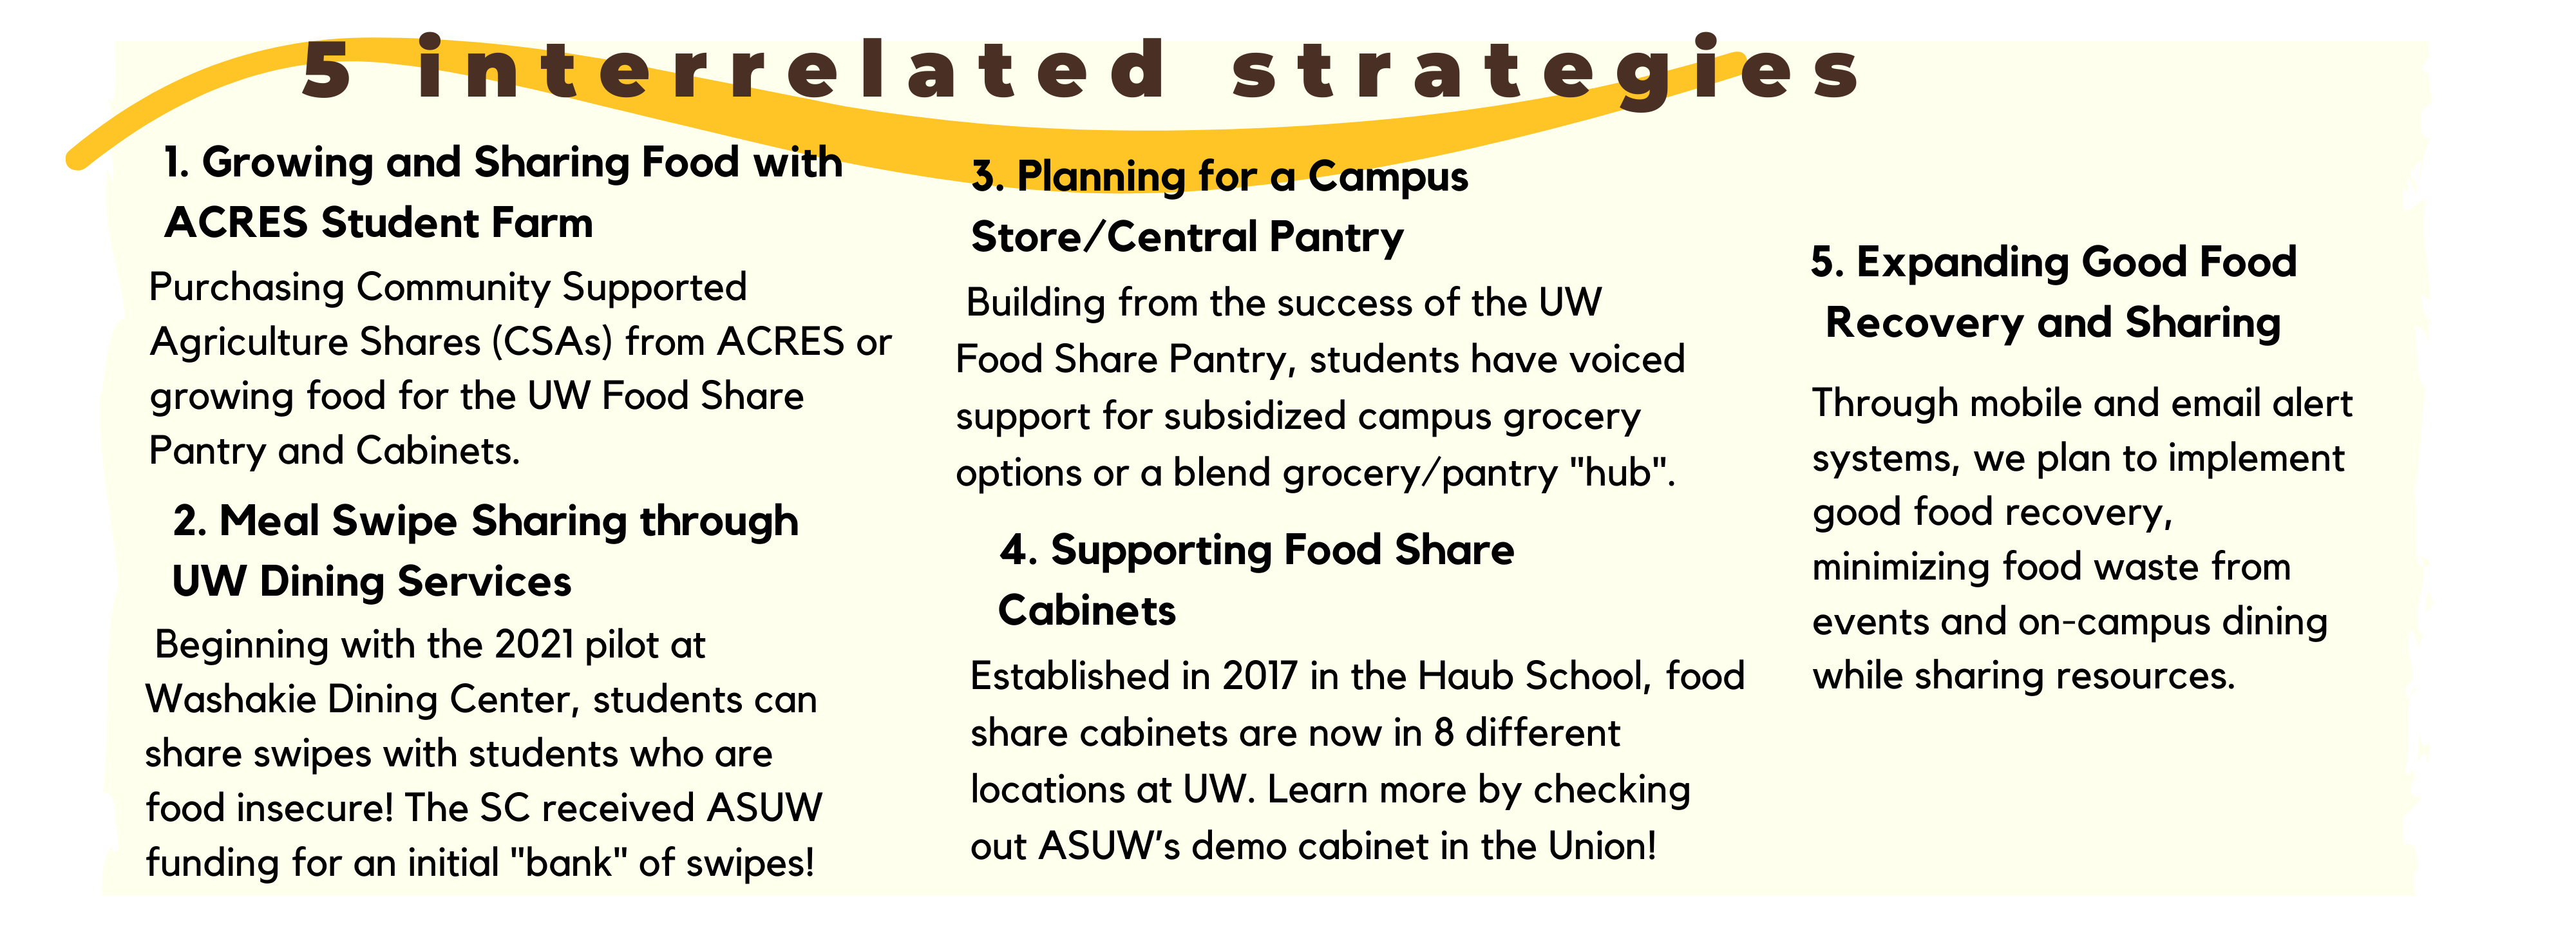 1. Growing and Sharing Food with ACRES Student Farm- Purchasing Community Supported Agriculture Shares (CSAs) from ACRES or growing food for the UW Food Share Pantry and Cabinets. 2. Meal Swipe Sharing through UW Dining Services- Beginning with the 2021 pilot at Washakie Dining Center, students can share swipes with students who are food insecure! The SC received ASUW funding for an initial "bank" of swipes! 3. Planning for a Campus Store/Central Pantry-  Building from the success of the UW Food Share Pantry, students have voiced support for subsidized campus grocery options or a blend grocery/pantry "hub". 4. Supporting Food Share Cabinets- Established in 2017 in the Haub School, food share cabinets are now in 8 different locations at UW. Learn more by checking out ASUW’s demo cabinet in the Union! 5. Expanding Good Food Recovery and Sharing- Through mobile and email alert systems, we plan to implement good food recovery, minimizing food waste from events and on-campus dining while sharing resources. 